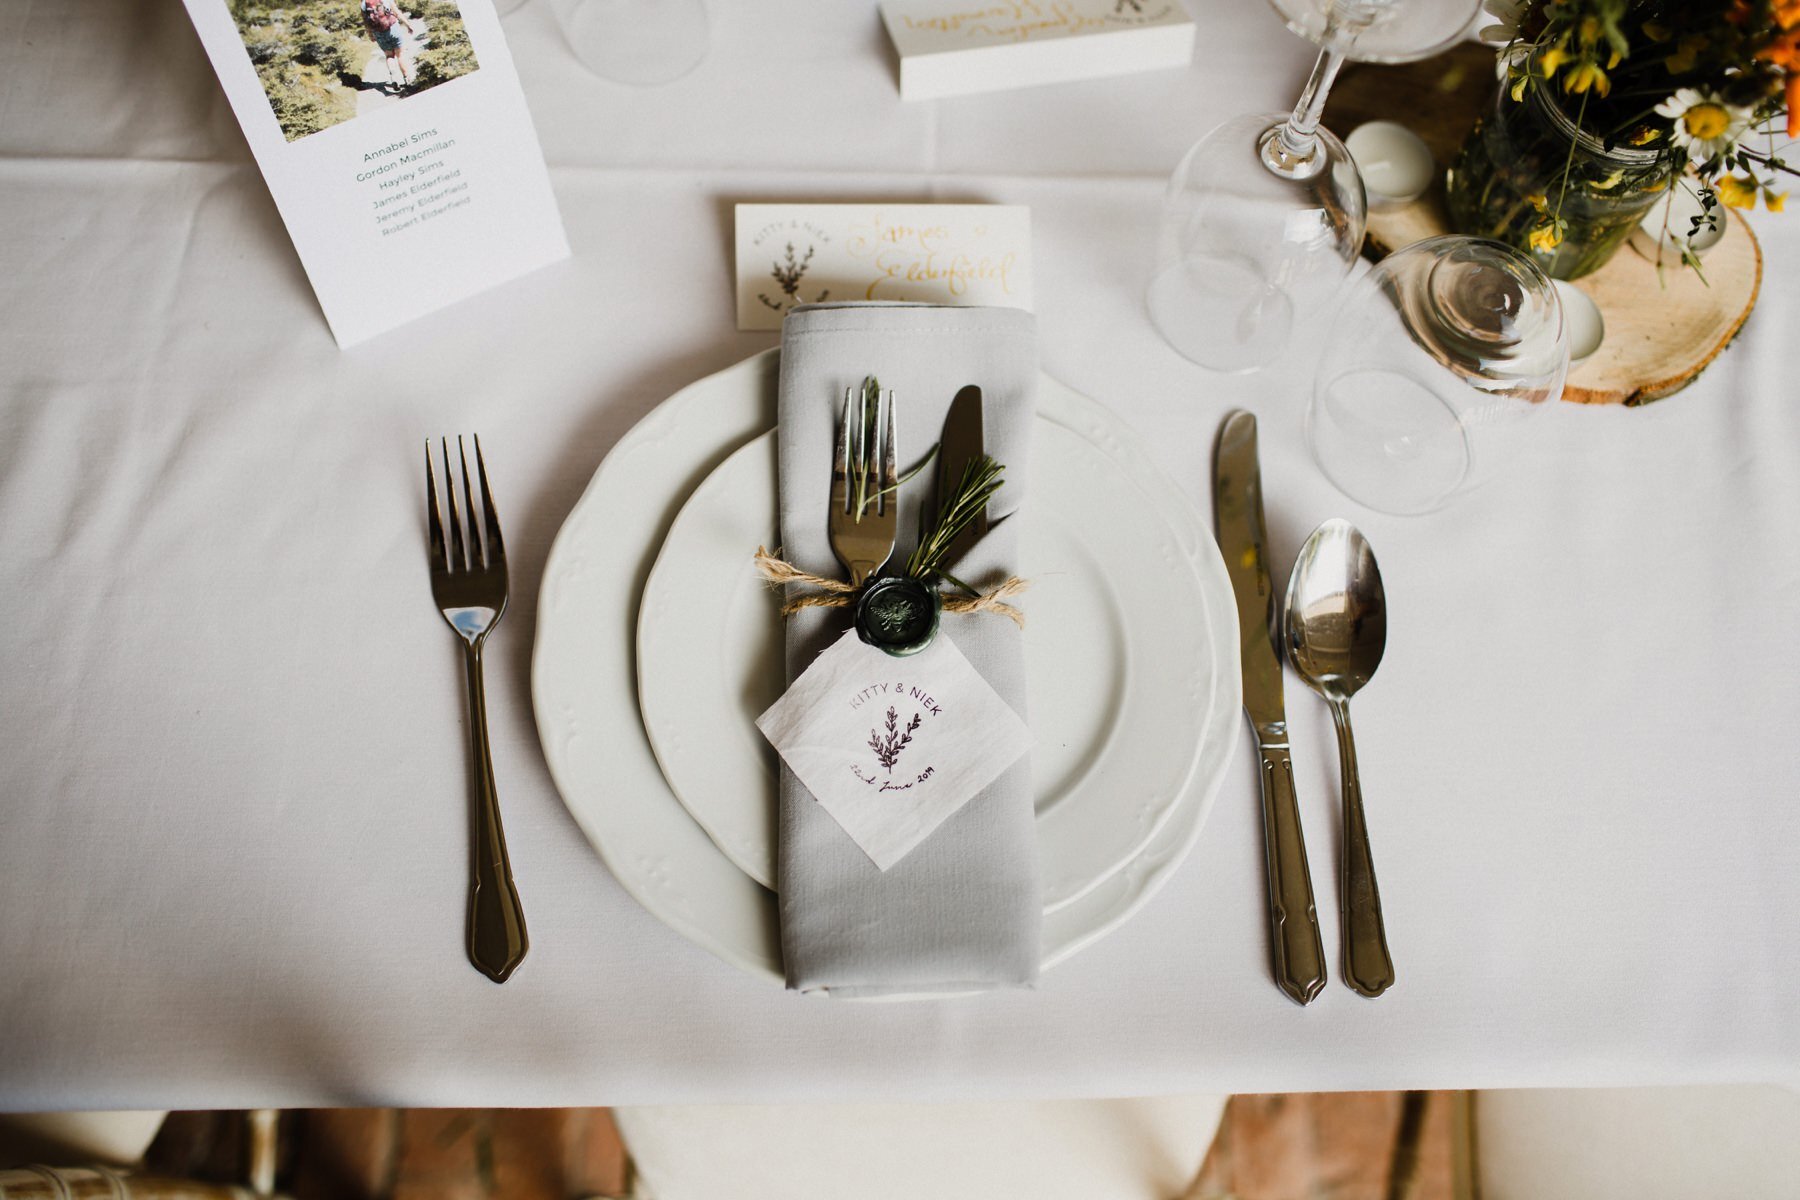 Table place setting and decor at Kingsettle Stud Wedding Venue